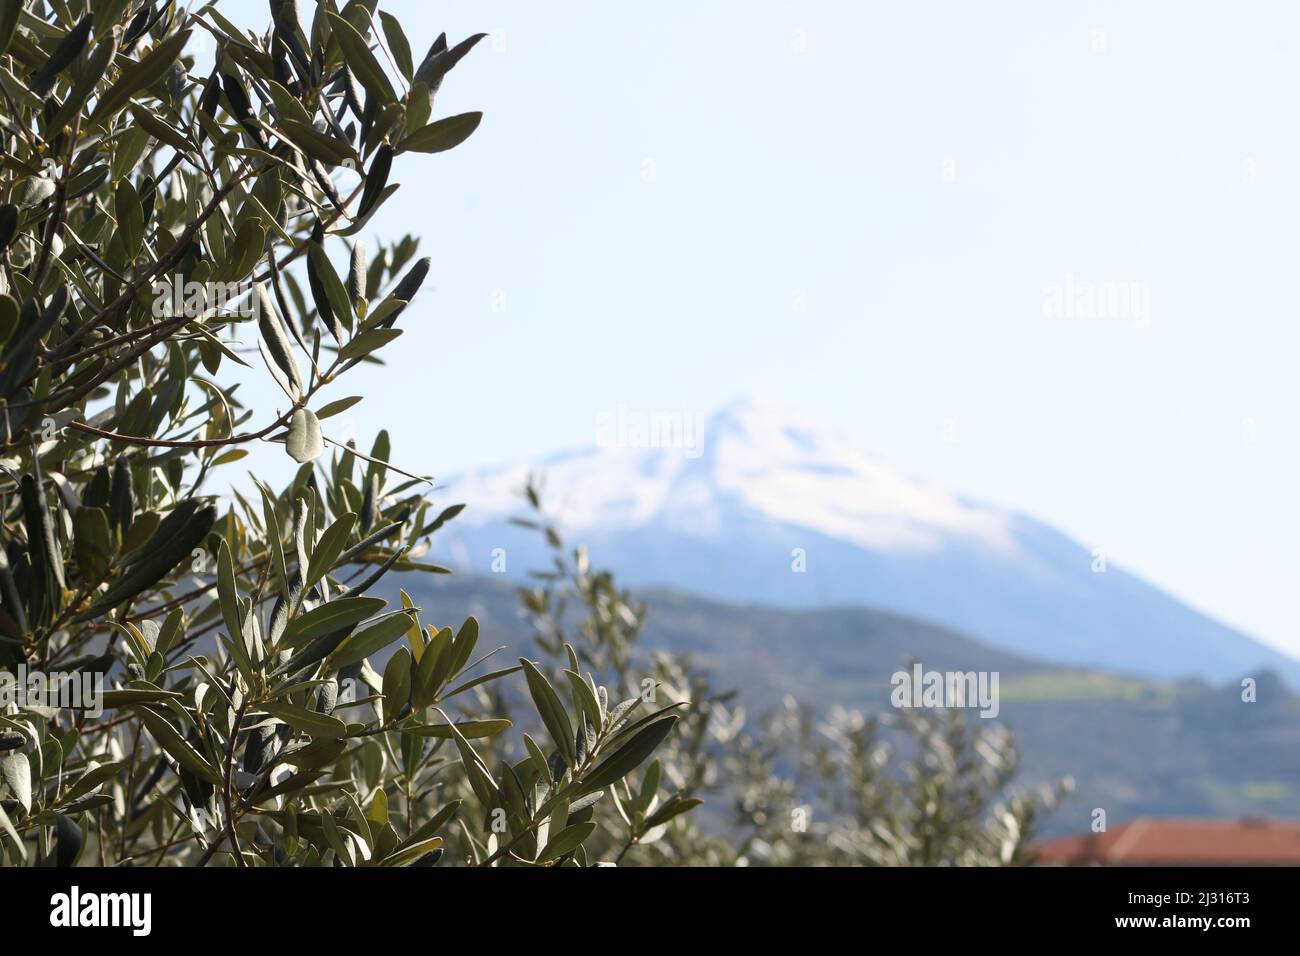 Green leafy olive branches with view of snowy mountain peak. Stock Photo